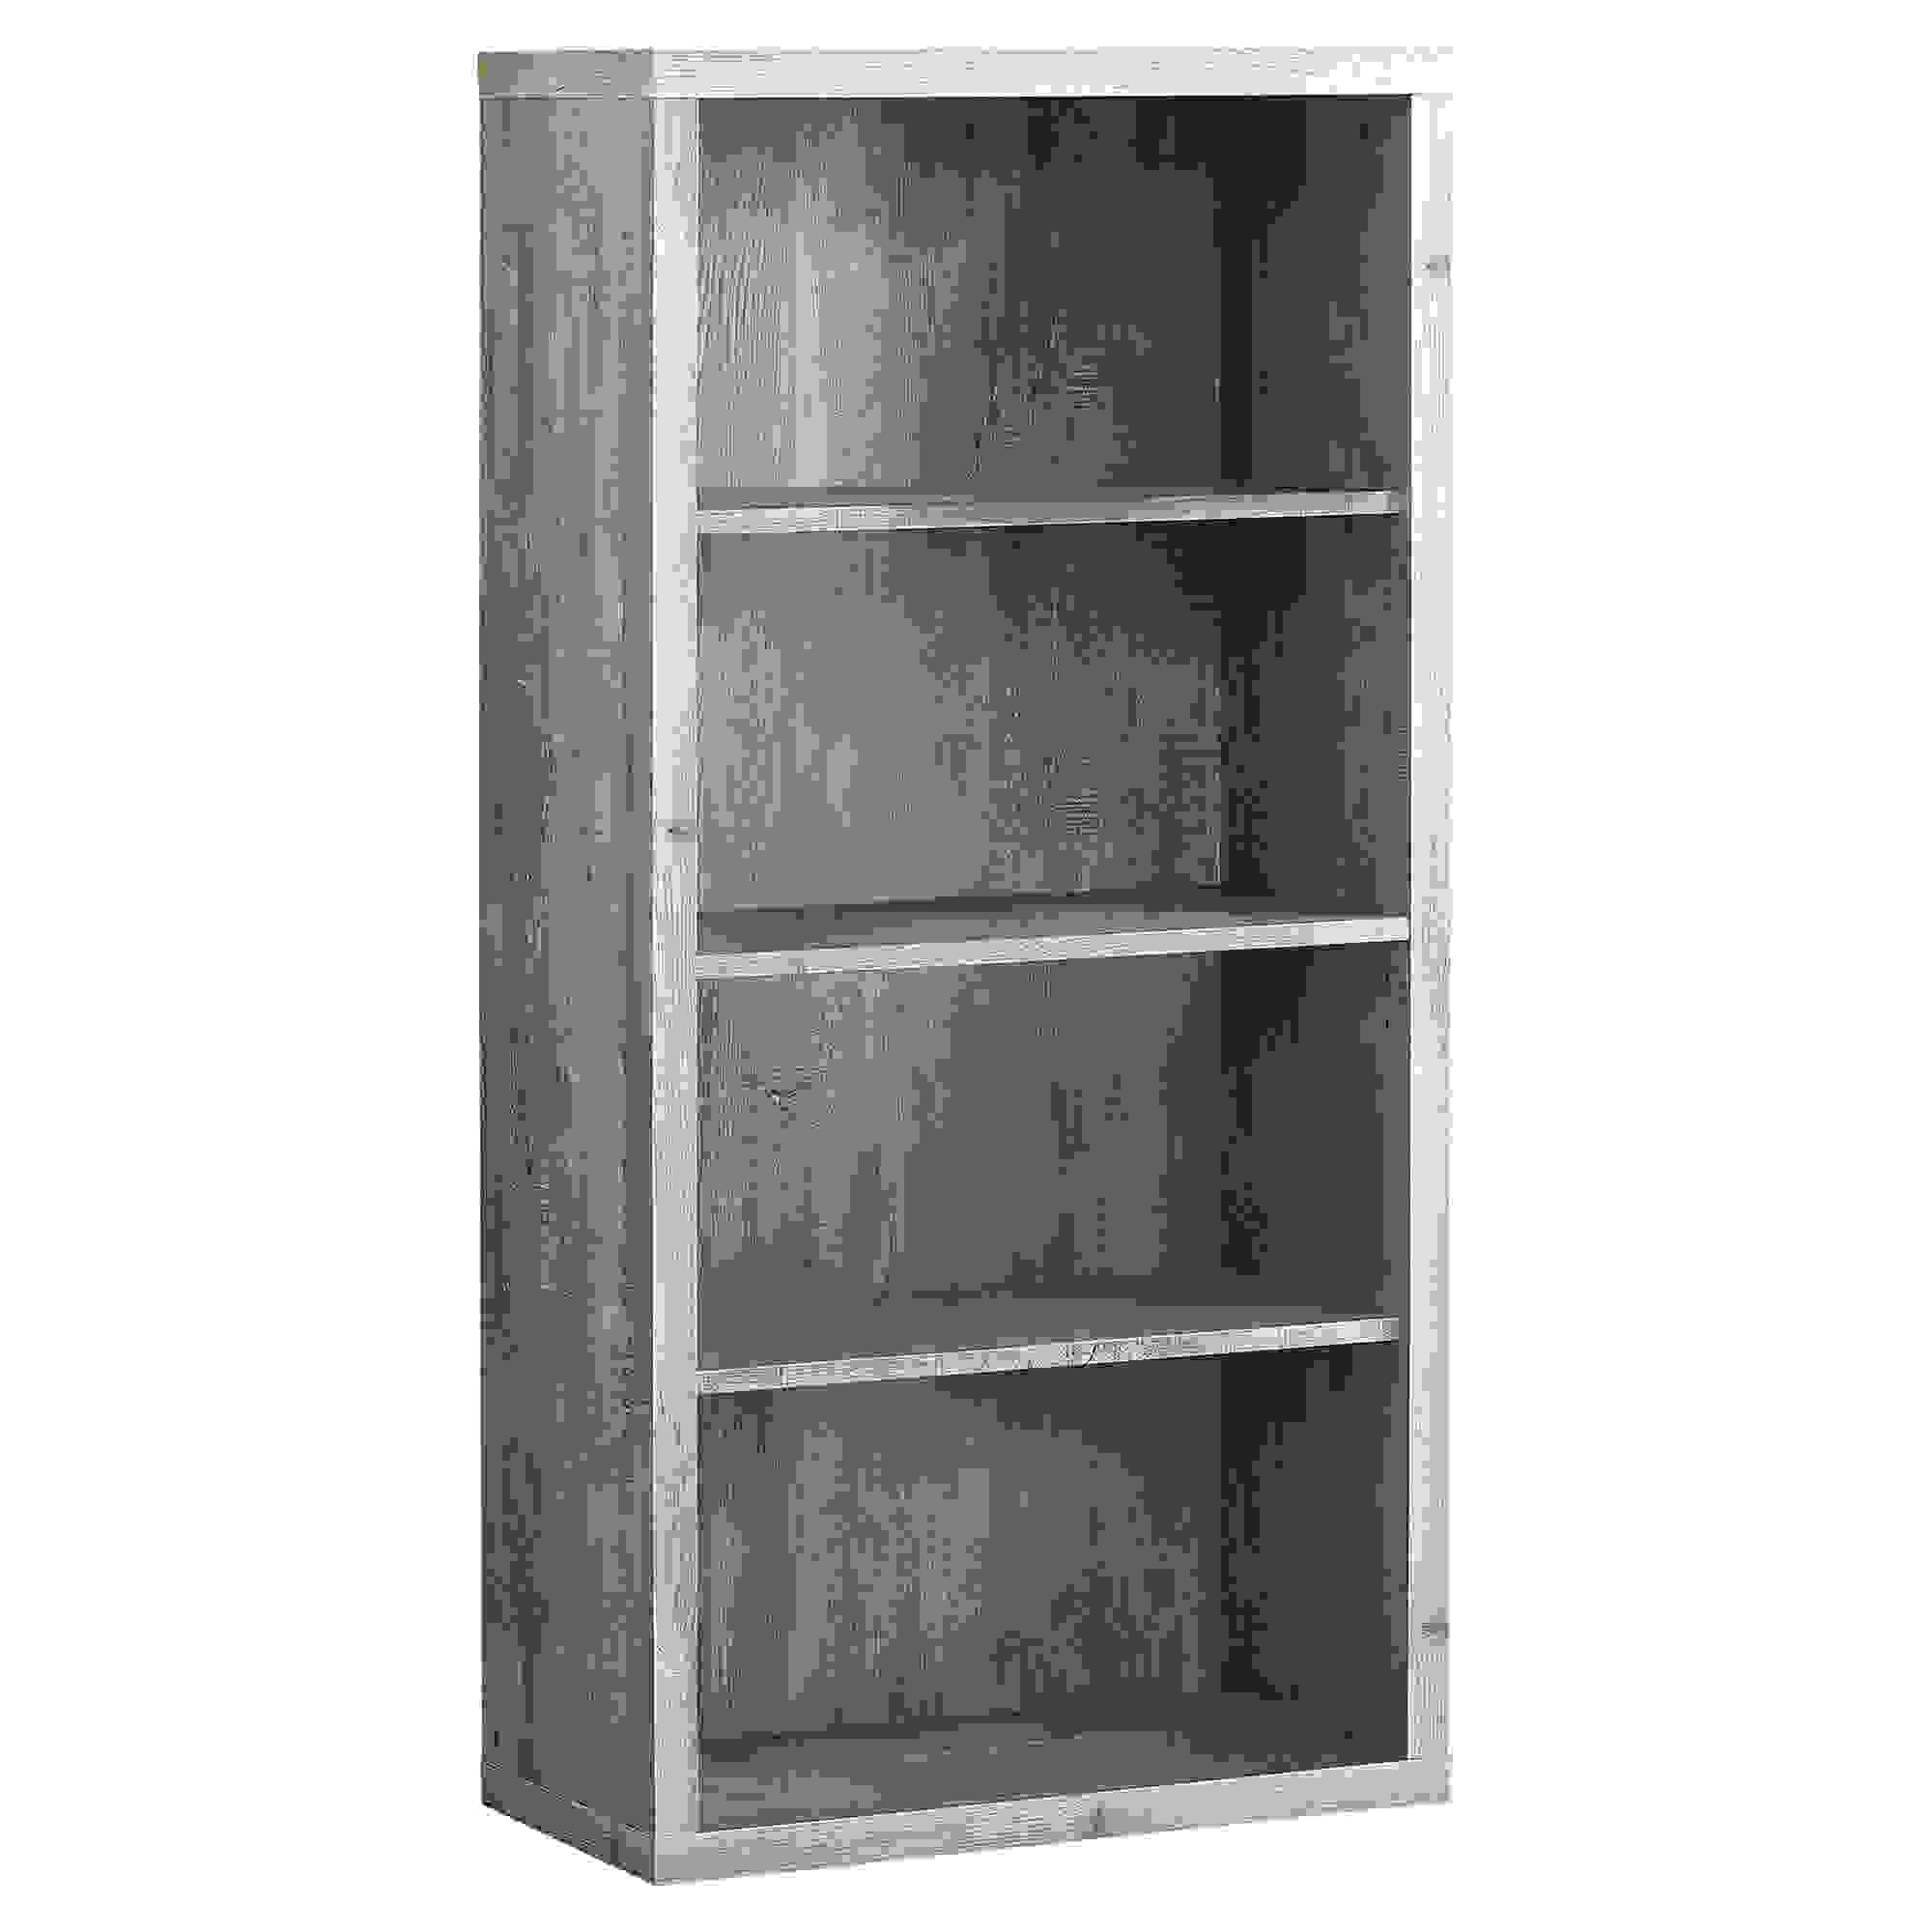 BOOKCASE - 48"H / TAUPE RECLAIMED WOOD-LOOK/ ADJ. SHELVES